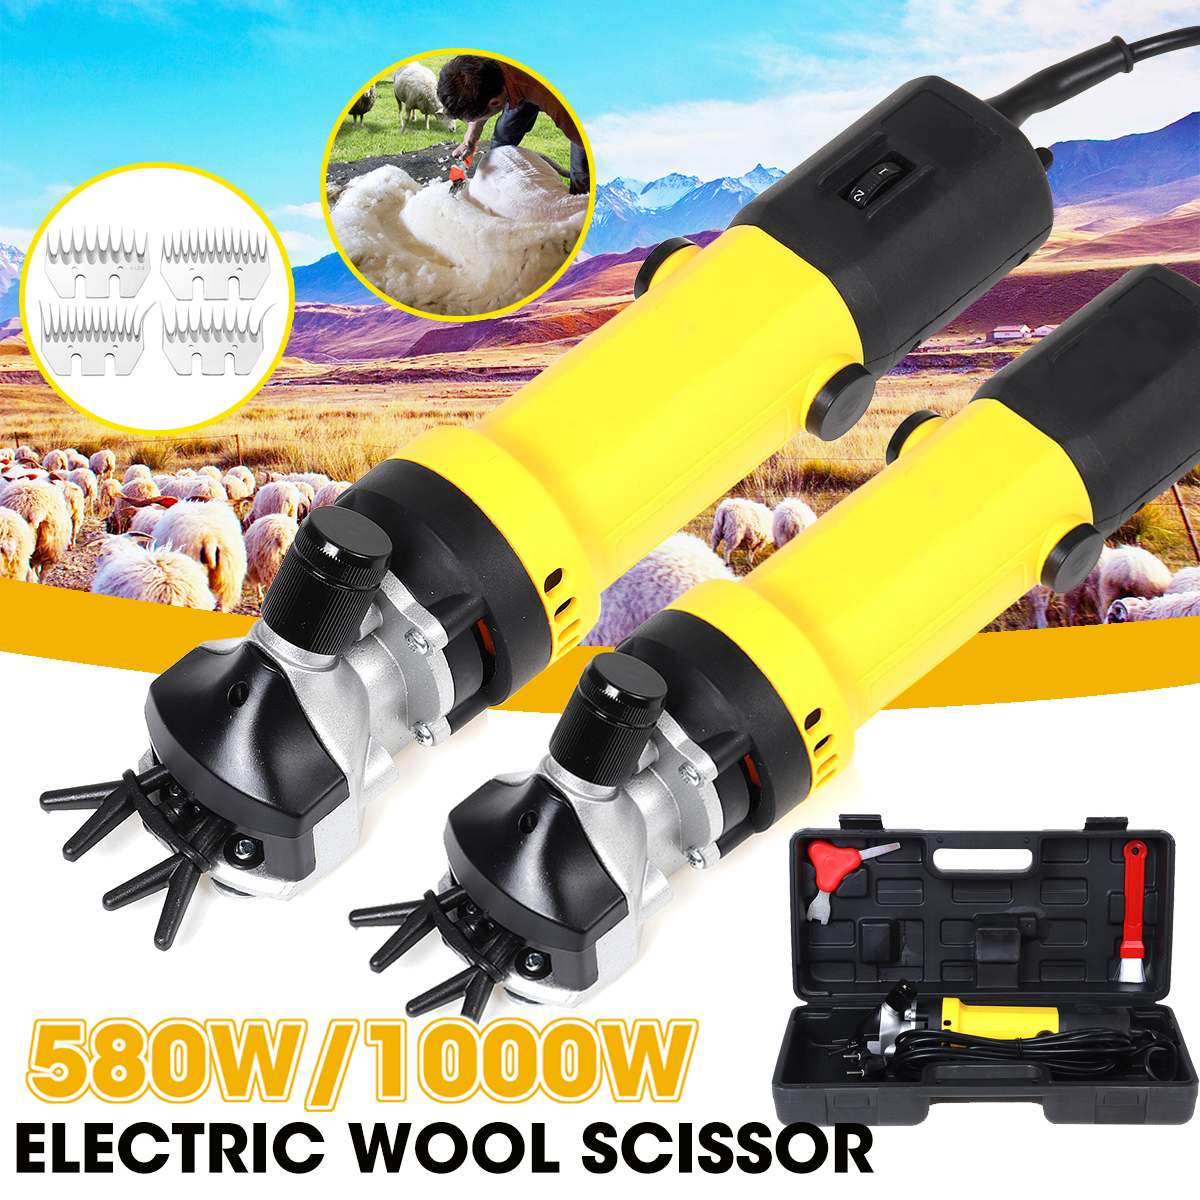 580W1000W-240V-Electric-Grooming-Clipper-Shearing-Horse-Dogs-pet-Sheep-Shear-6-Speed-1716960-1